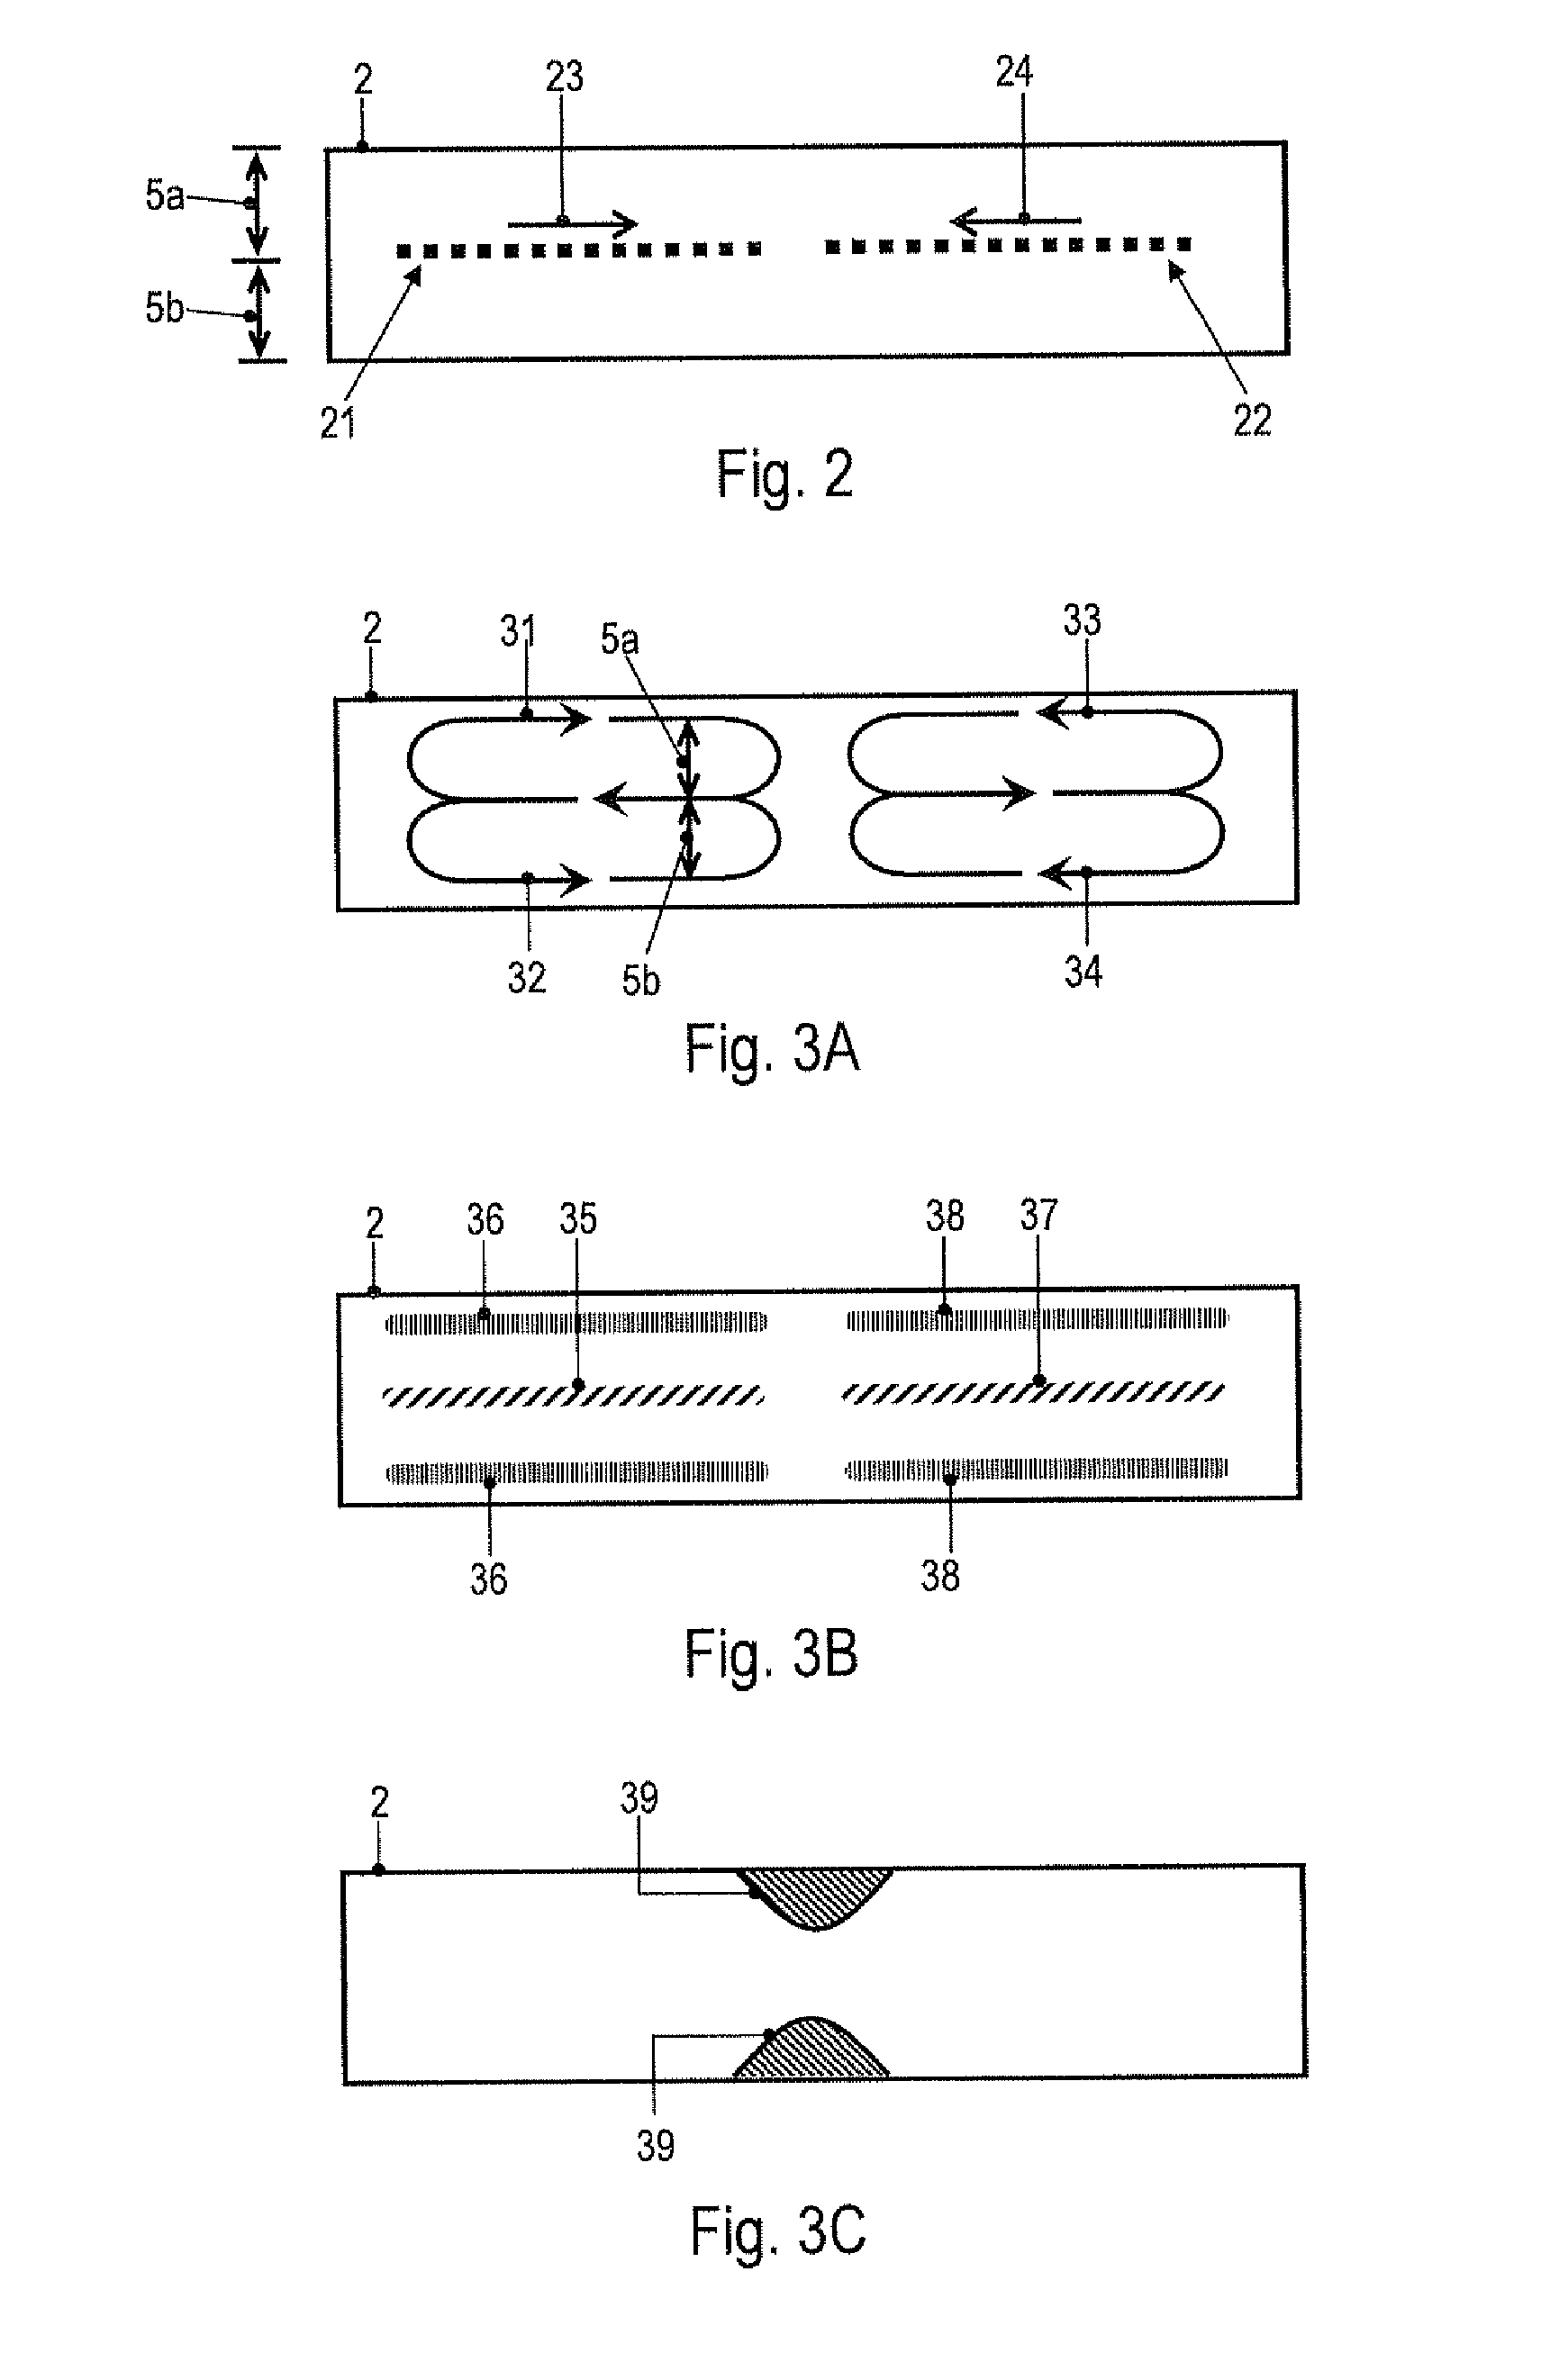 Method and Apparatus for Amplifying Nucleic Acid Sequences